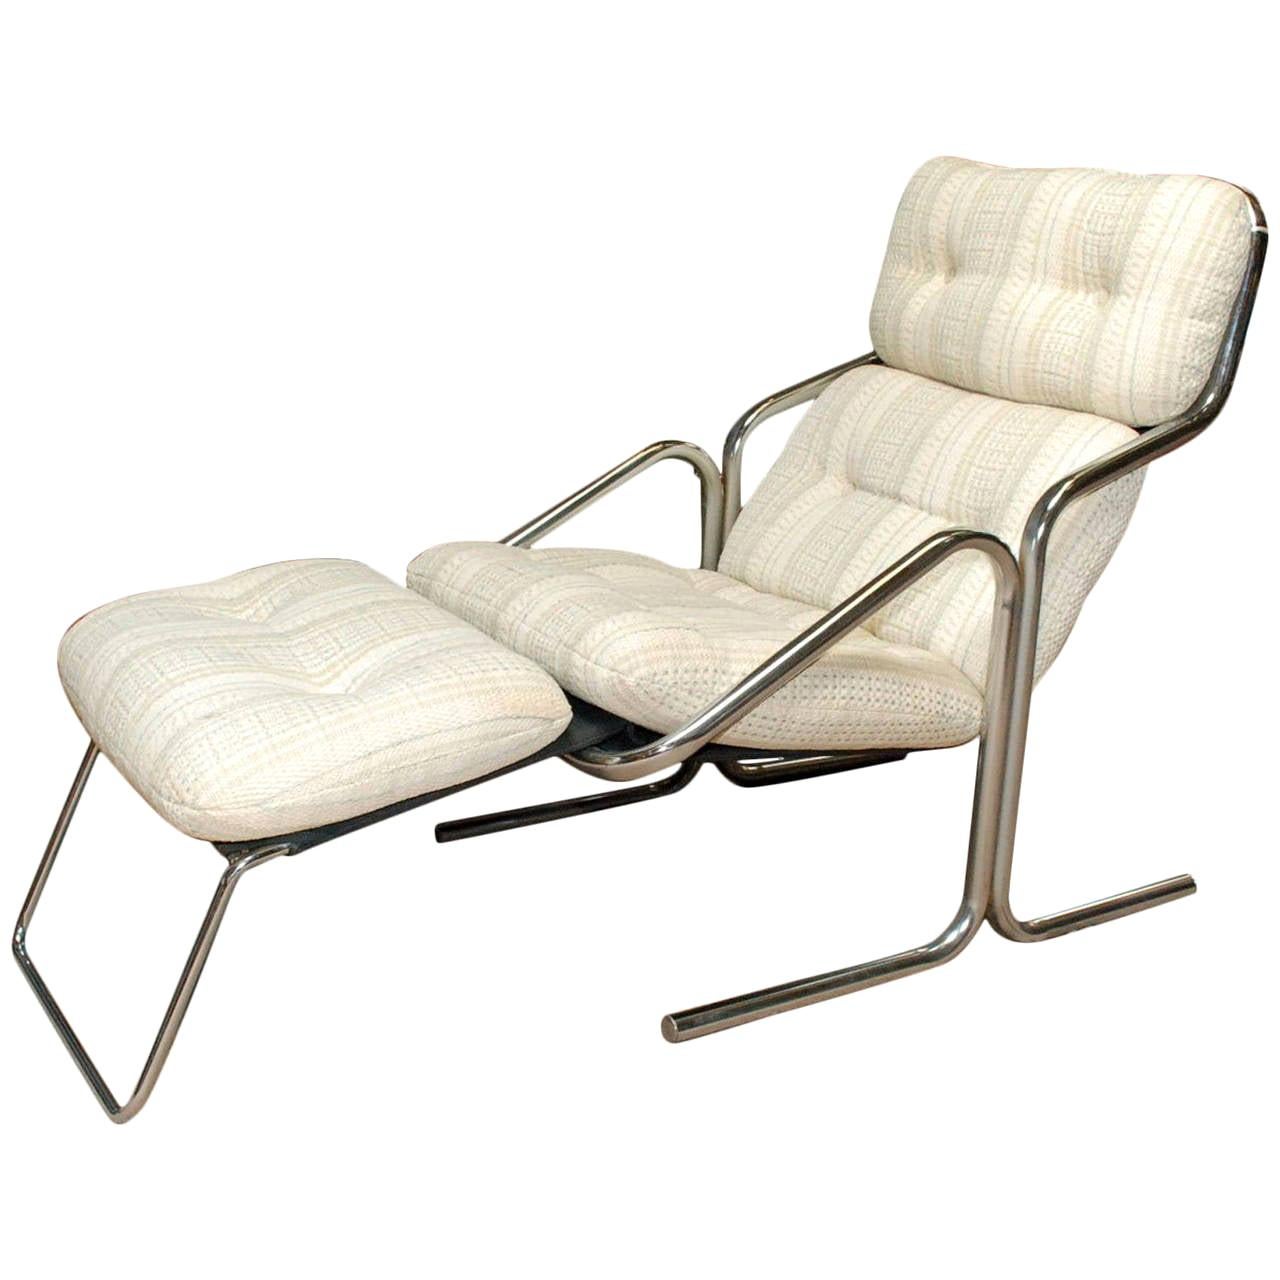 Midcentury Lounger by Jerry Johnson